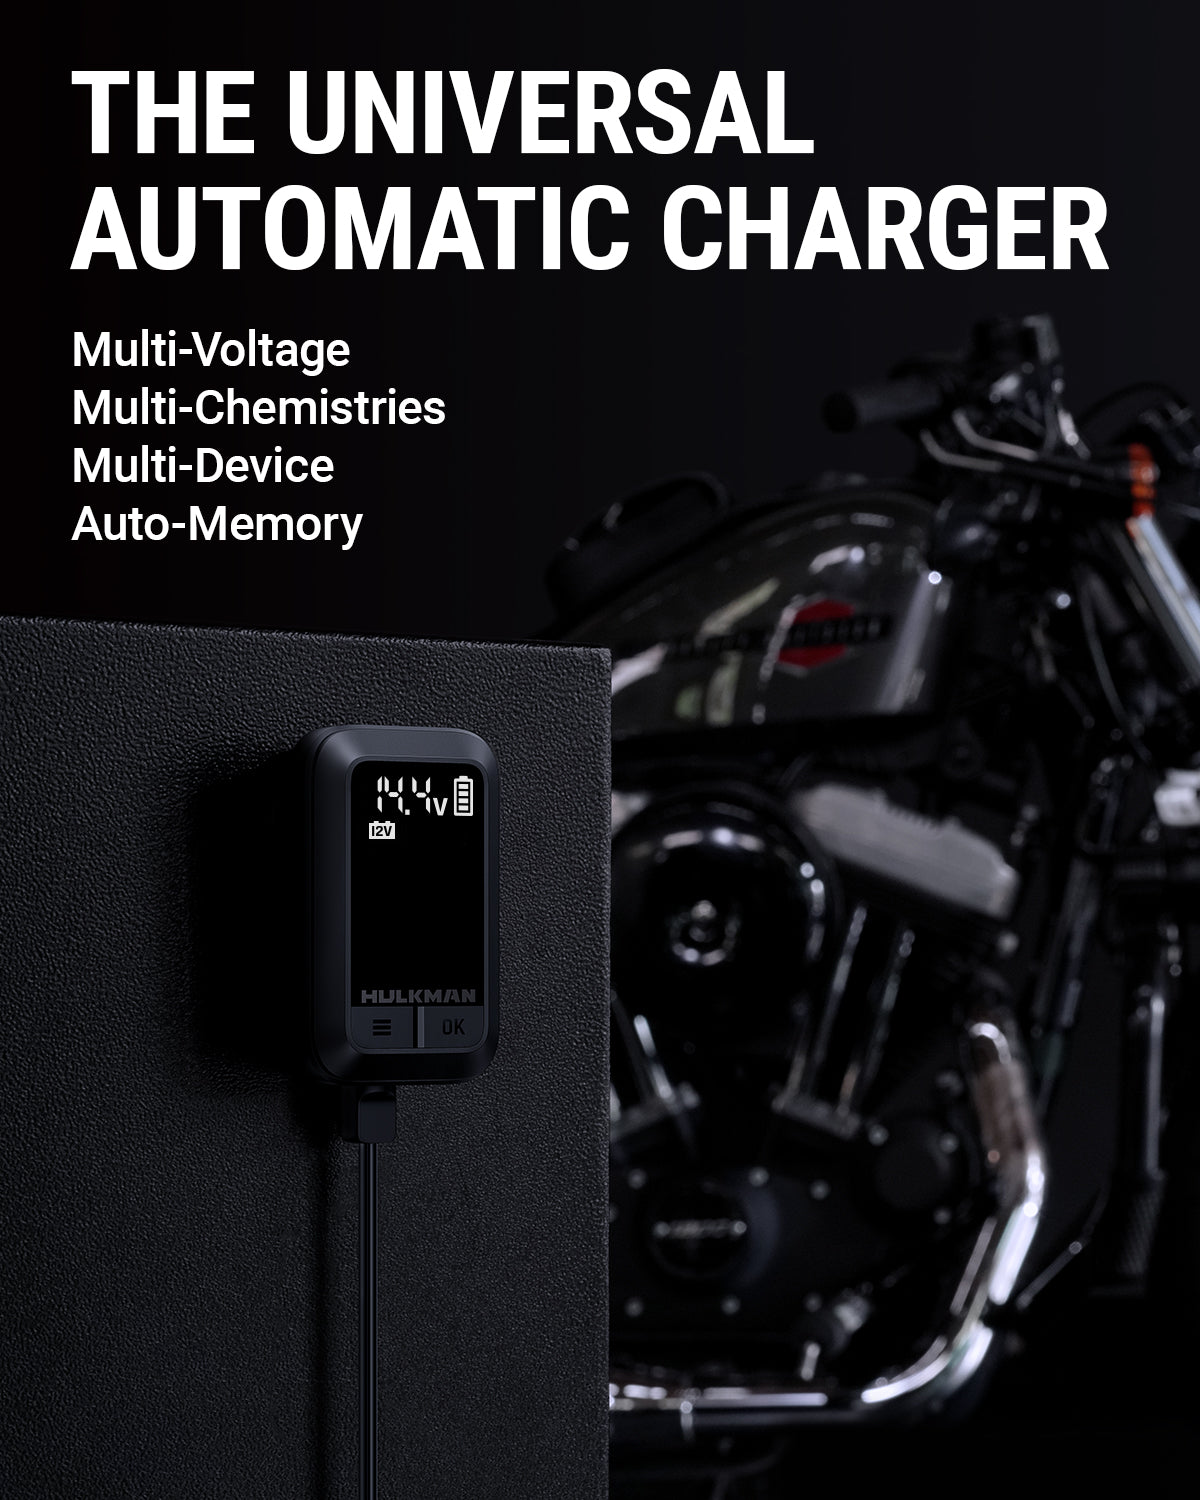 HULKMAN Sigma 1 Car Battery Charger 1A 6V/12V Automatic Smart Trickle  Charger